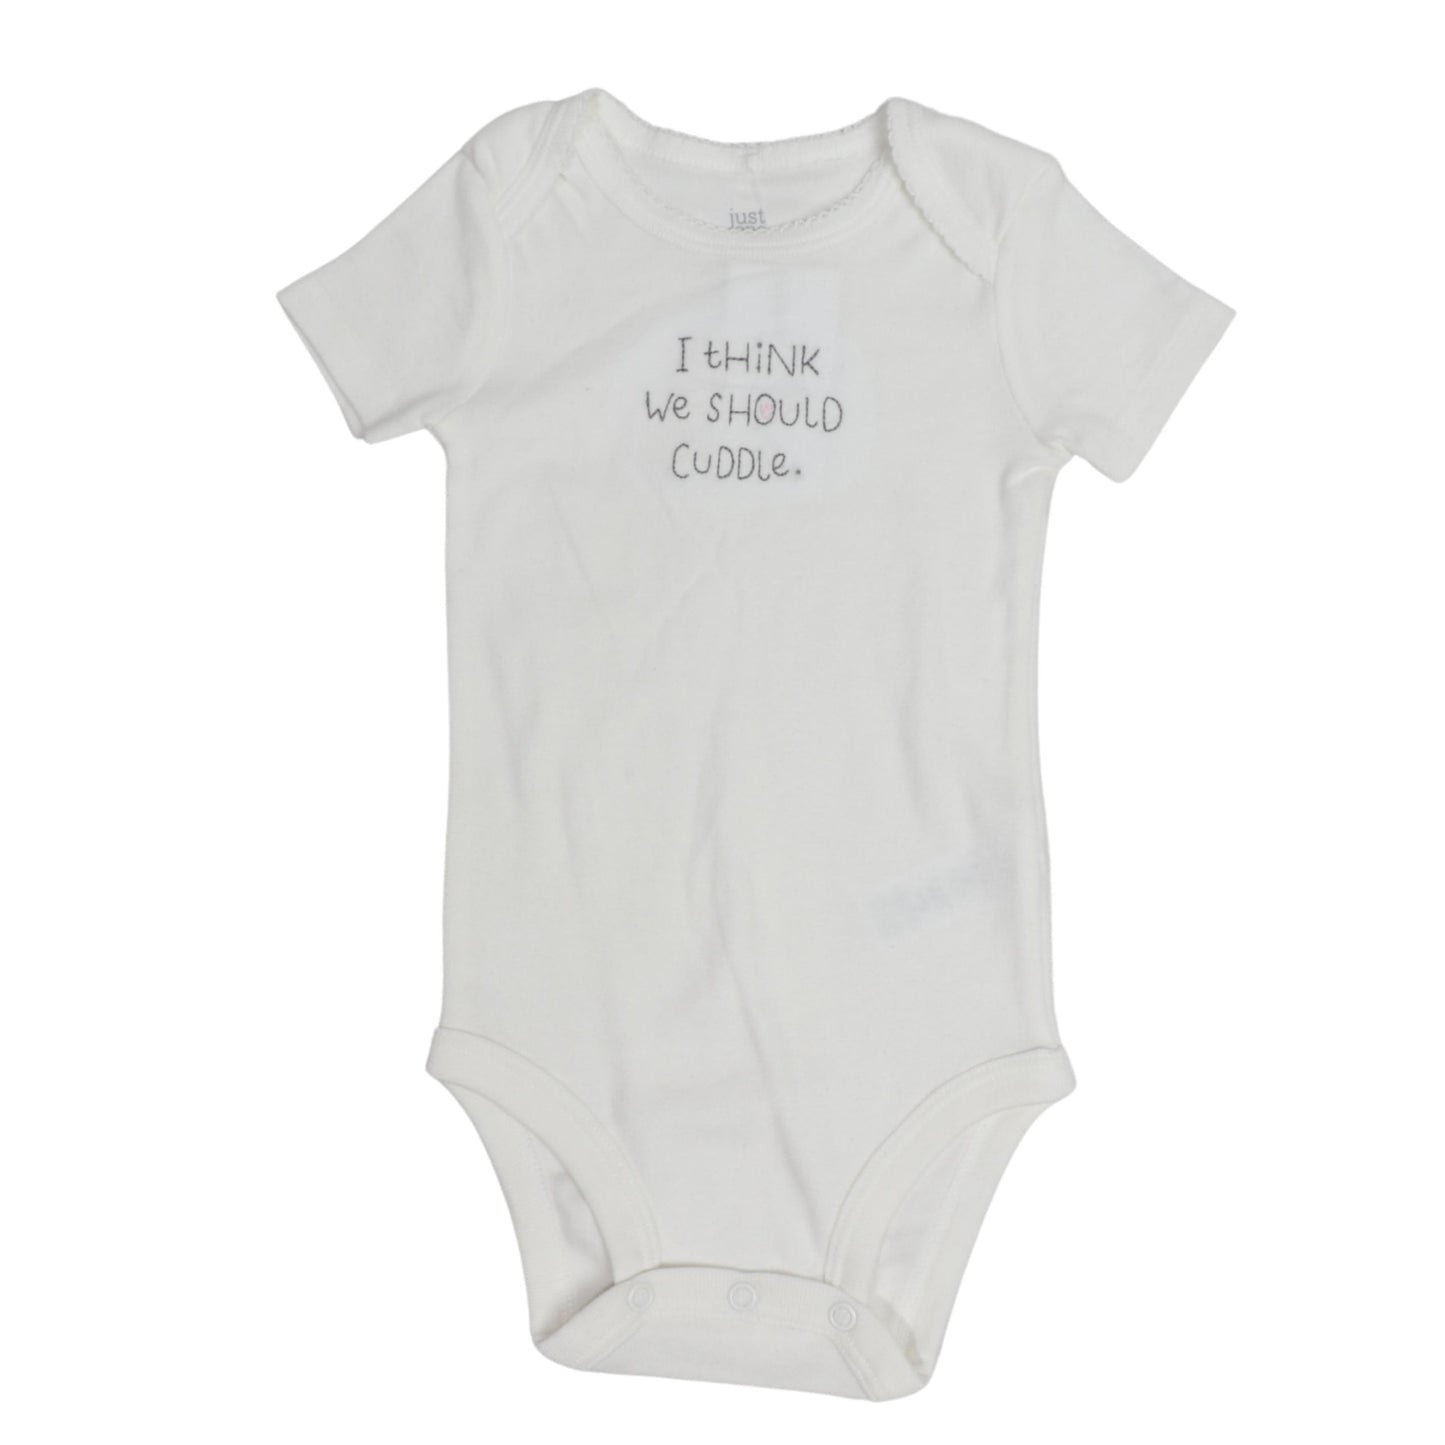 CARTER'S Baby Girl 6 Month / White CARTER'S - I Think We Should Cuddle Bodysuit